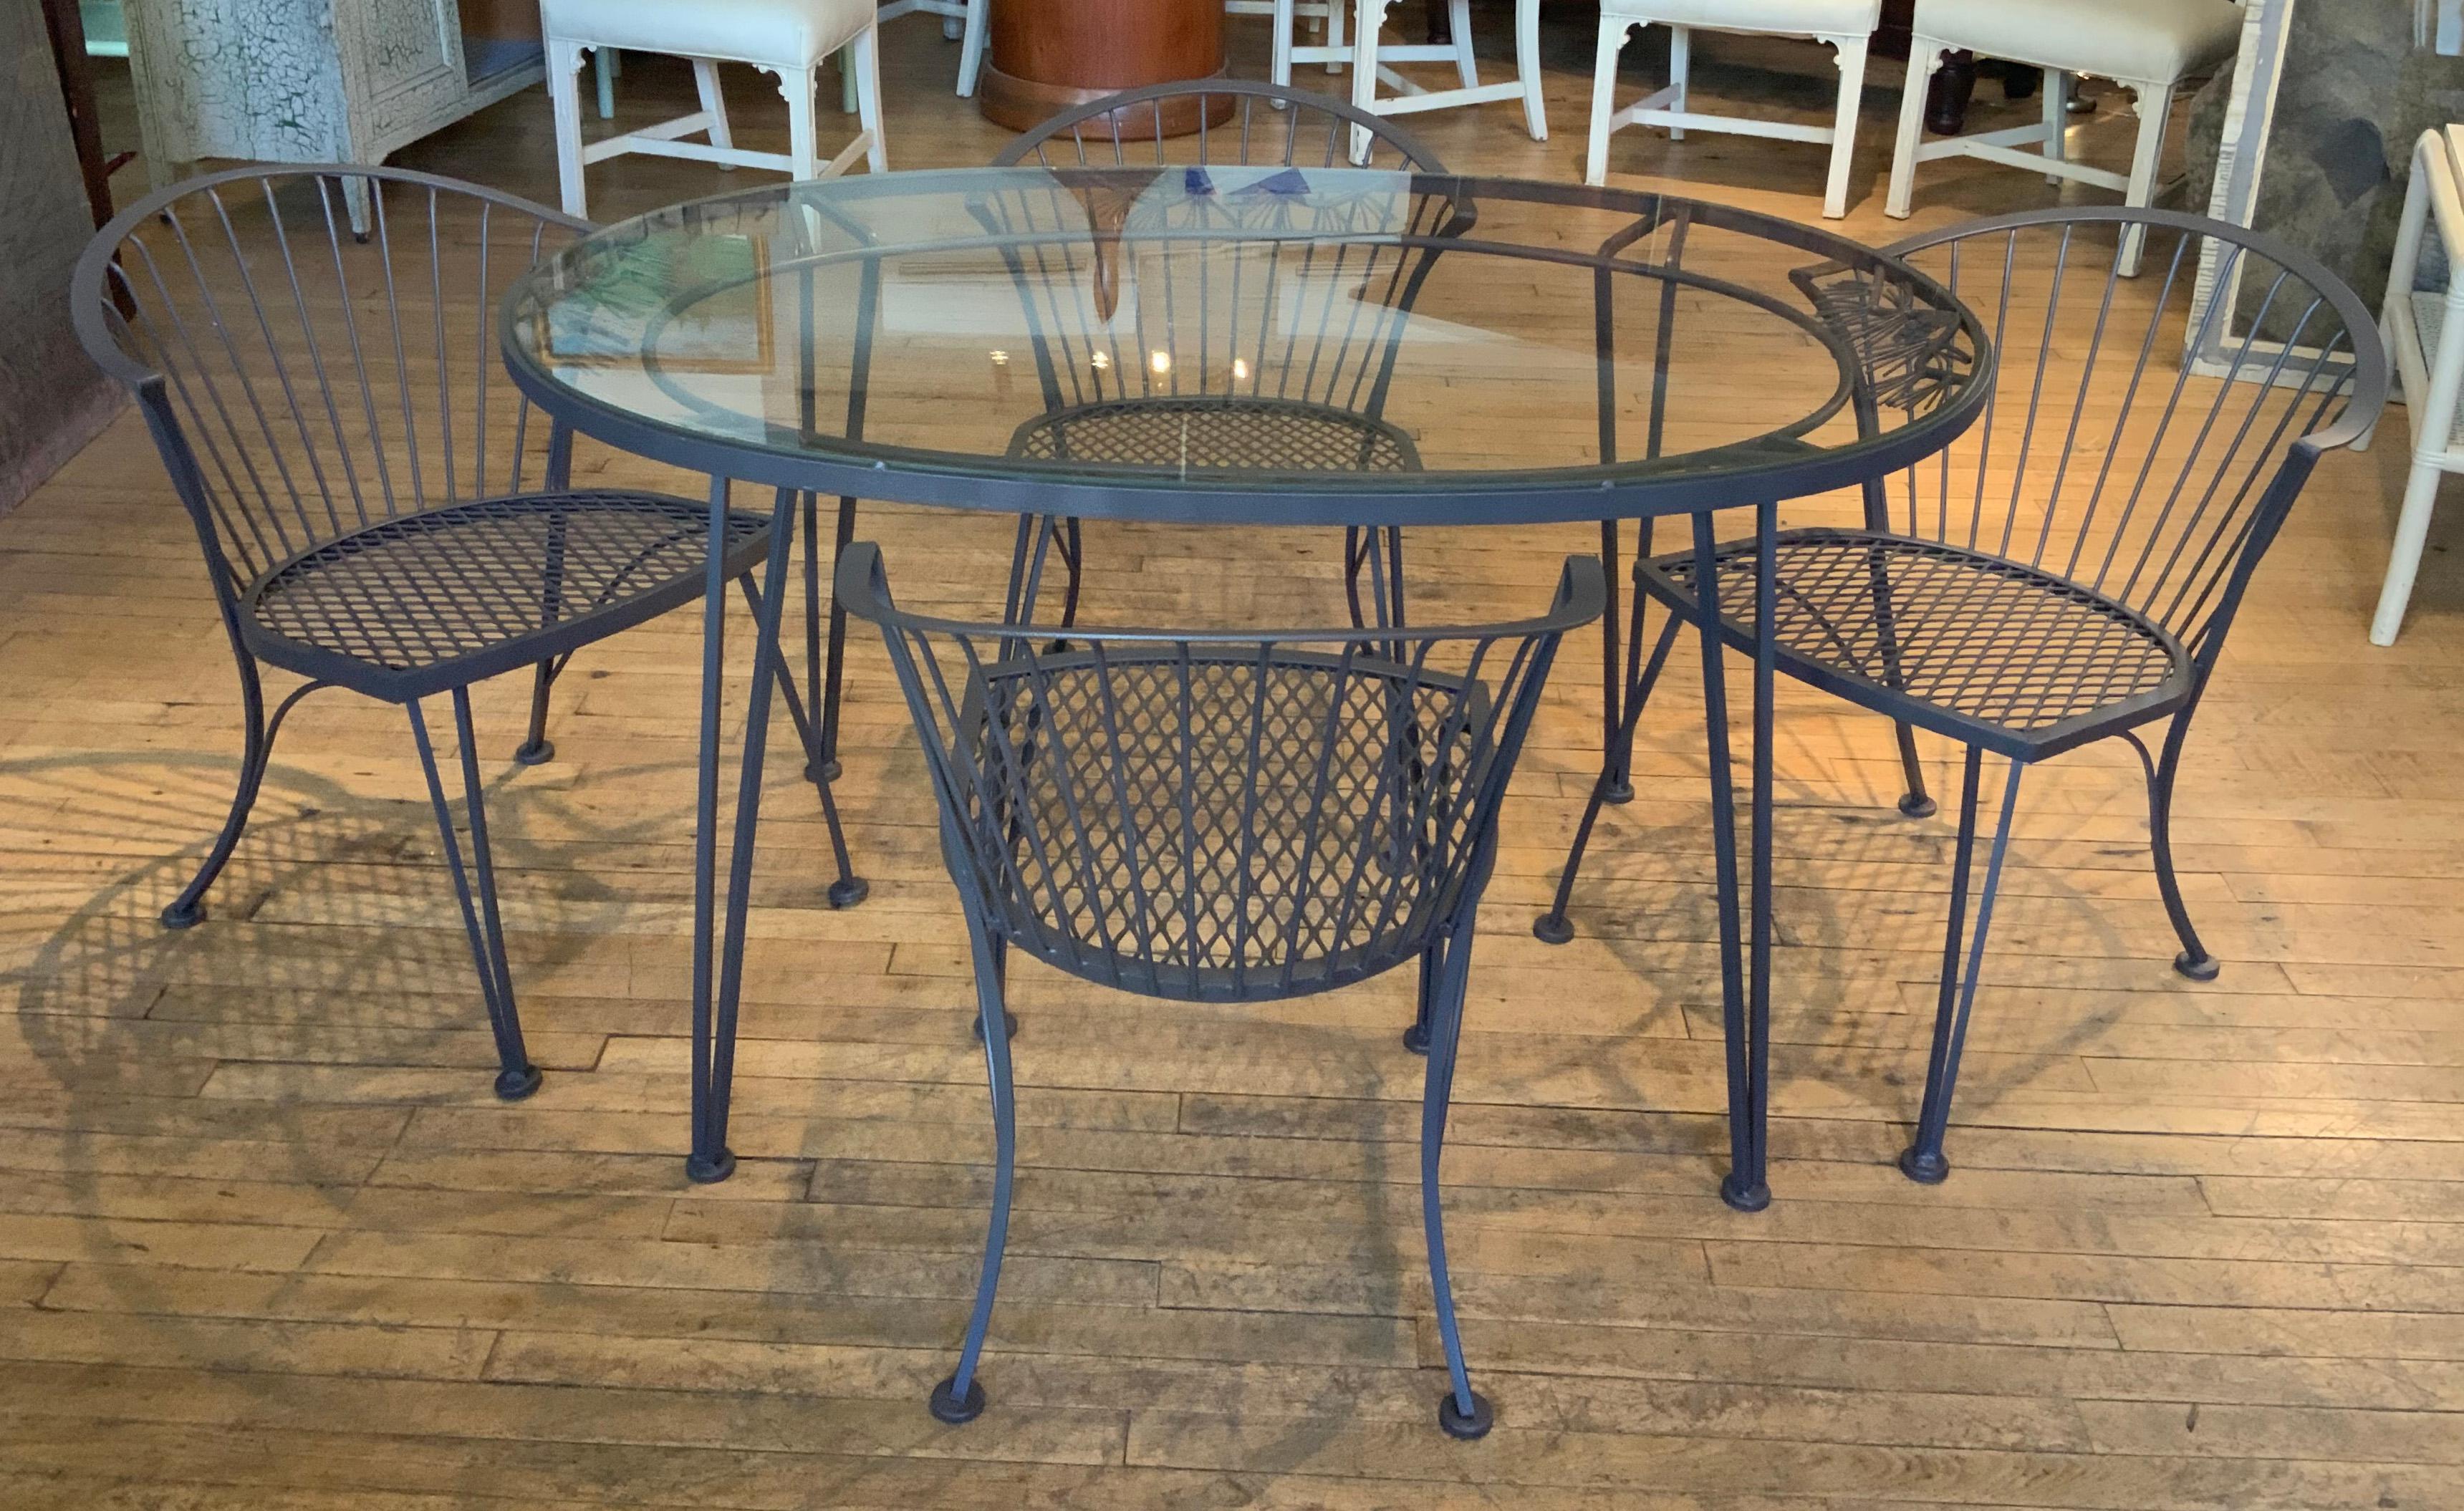 A vintage 1950s wrought iron garden dining set by Woodard. 'Pinecrest' was one of their most charming designs in the 1950s, named for the pine needle & pinecone motif in the skirt of the dining table. this set consists of a beautiful oval dining